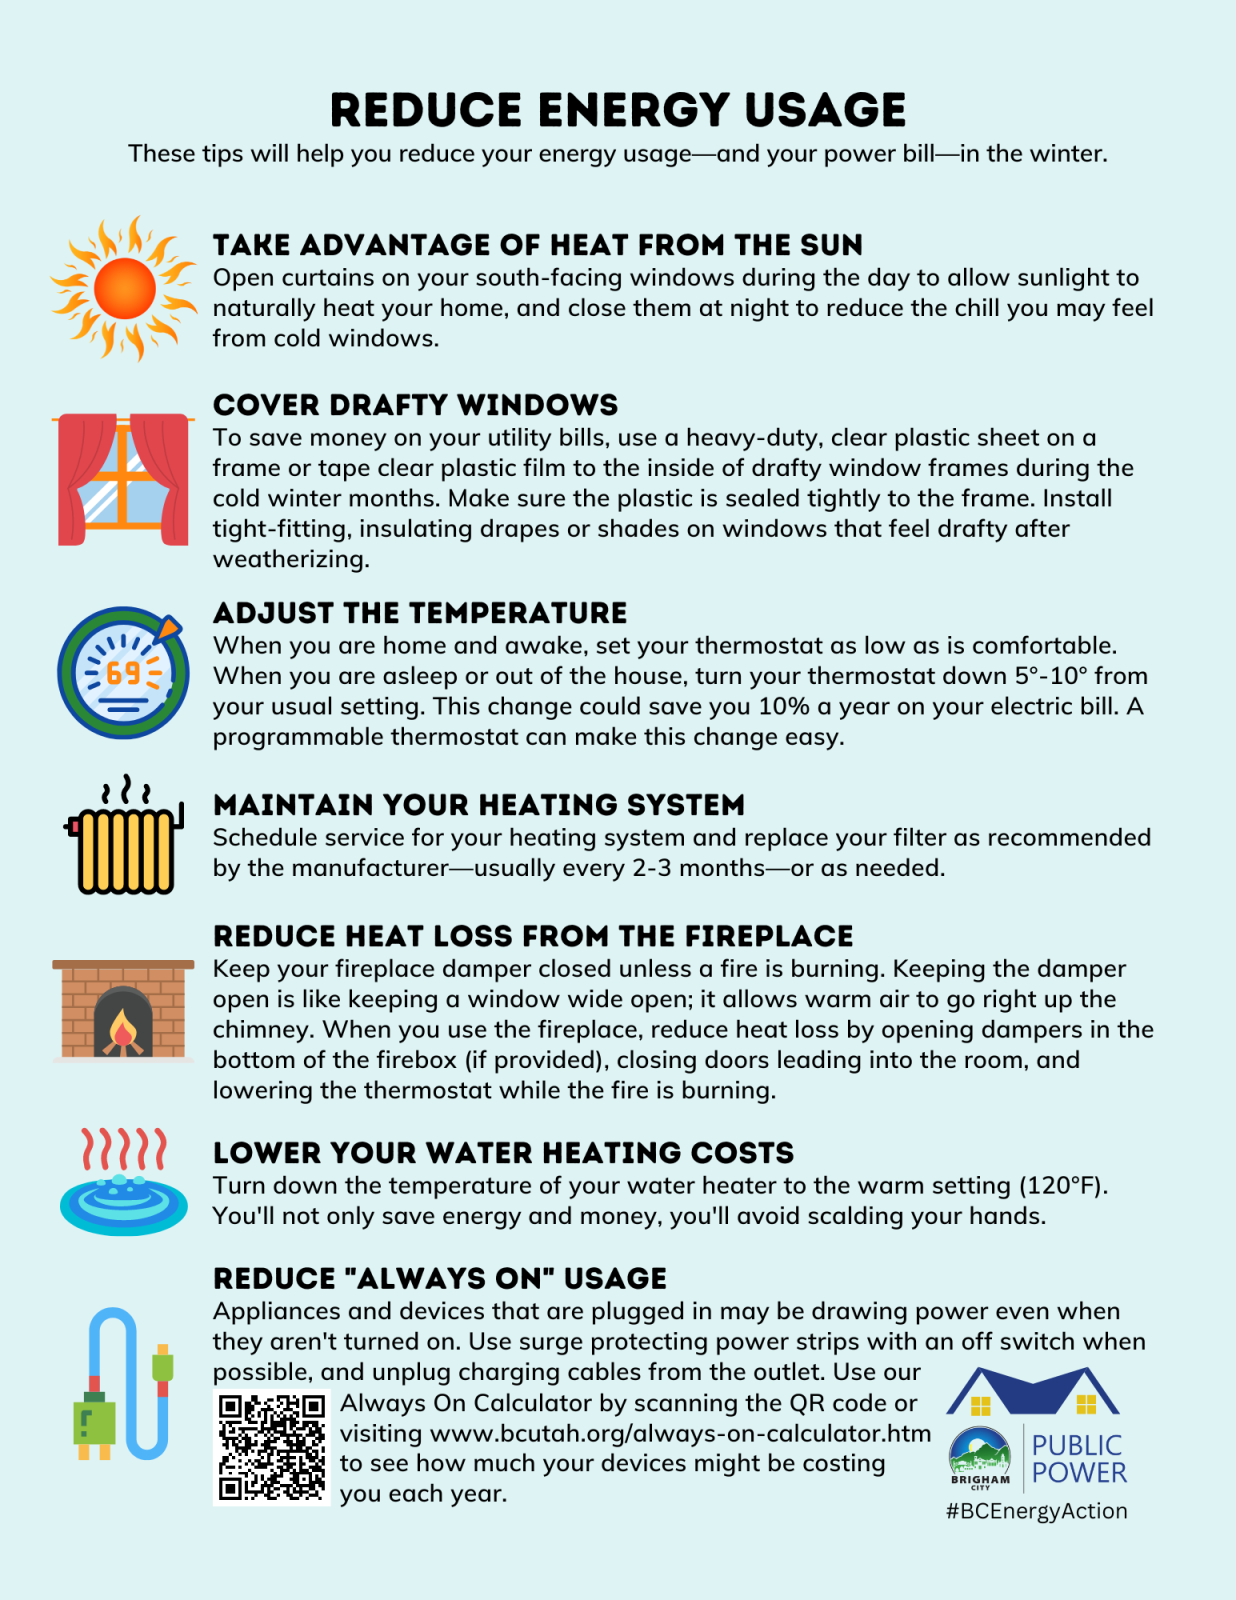 a list of tips for reducing energy usage in winter